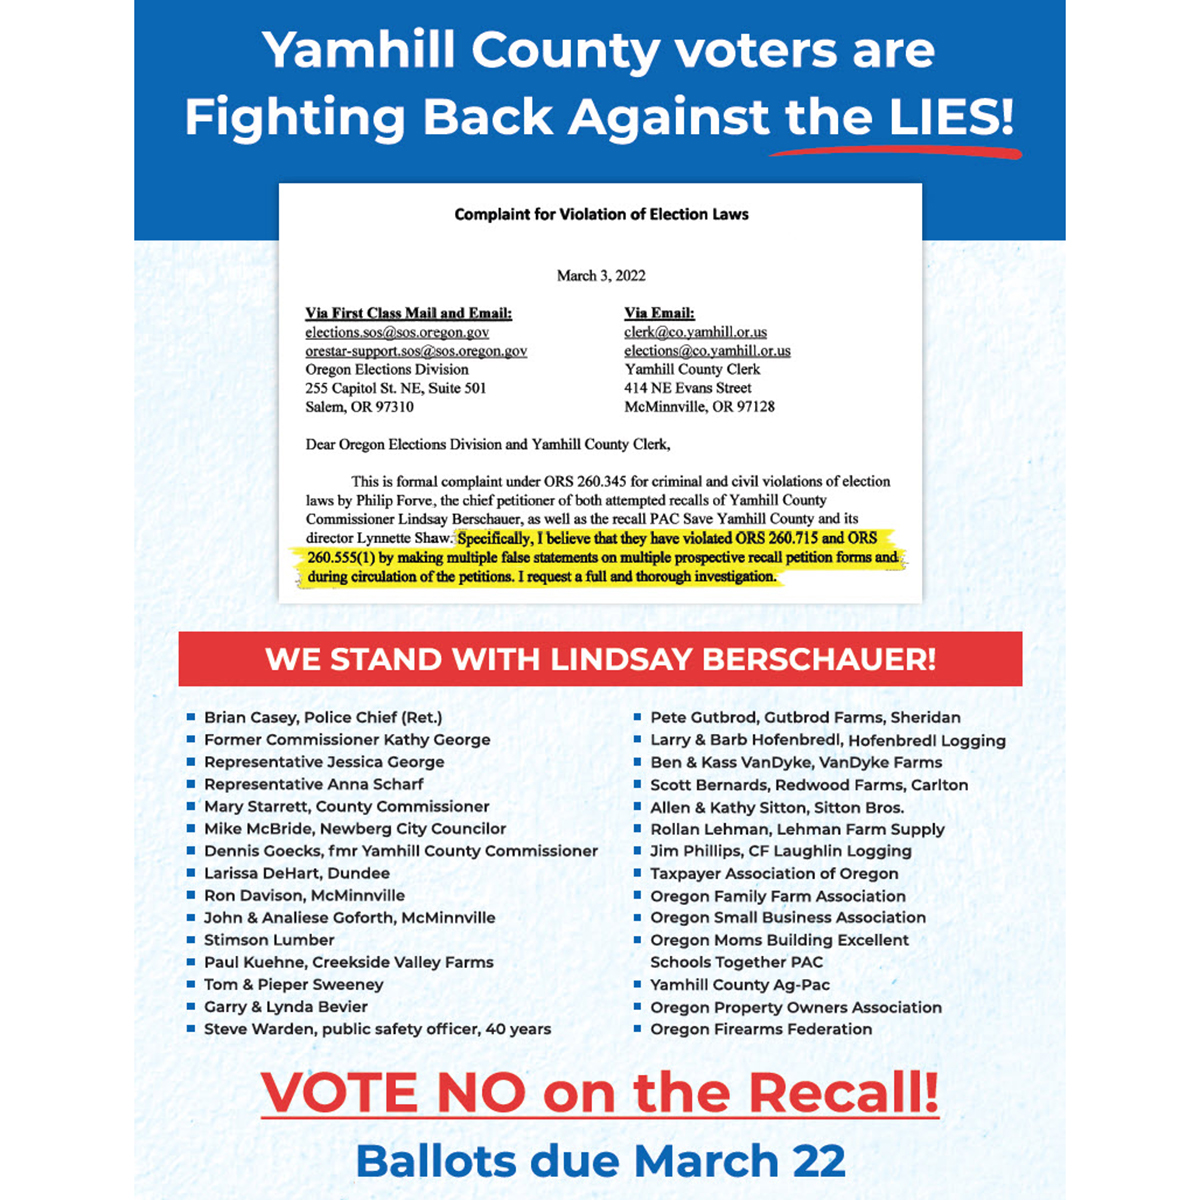 Fighting Back Against the Lies - Vote No on the Recall of Lindsay Berschauer